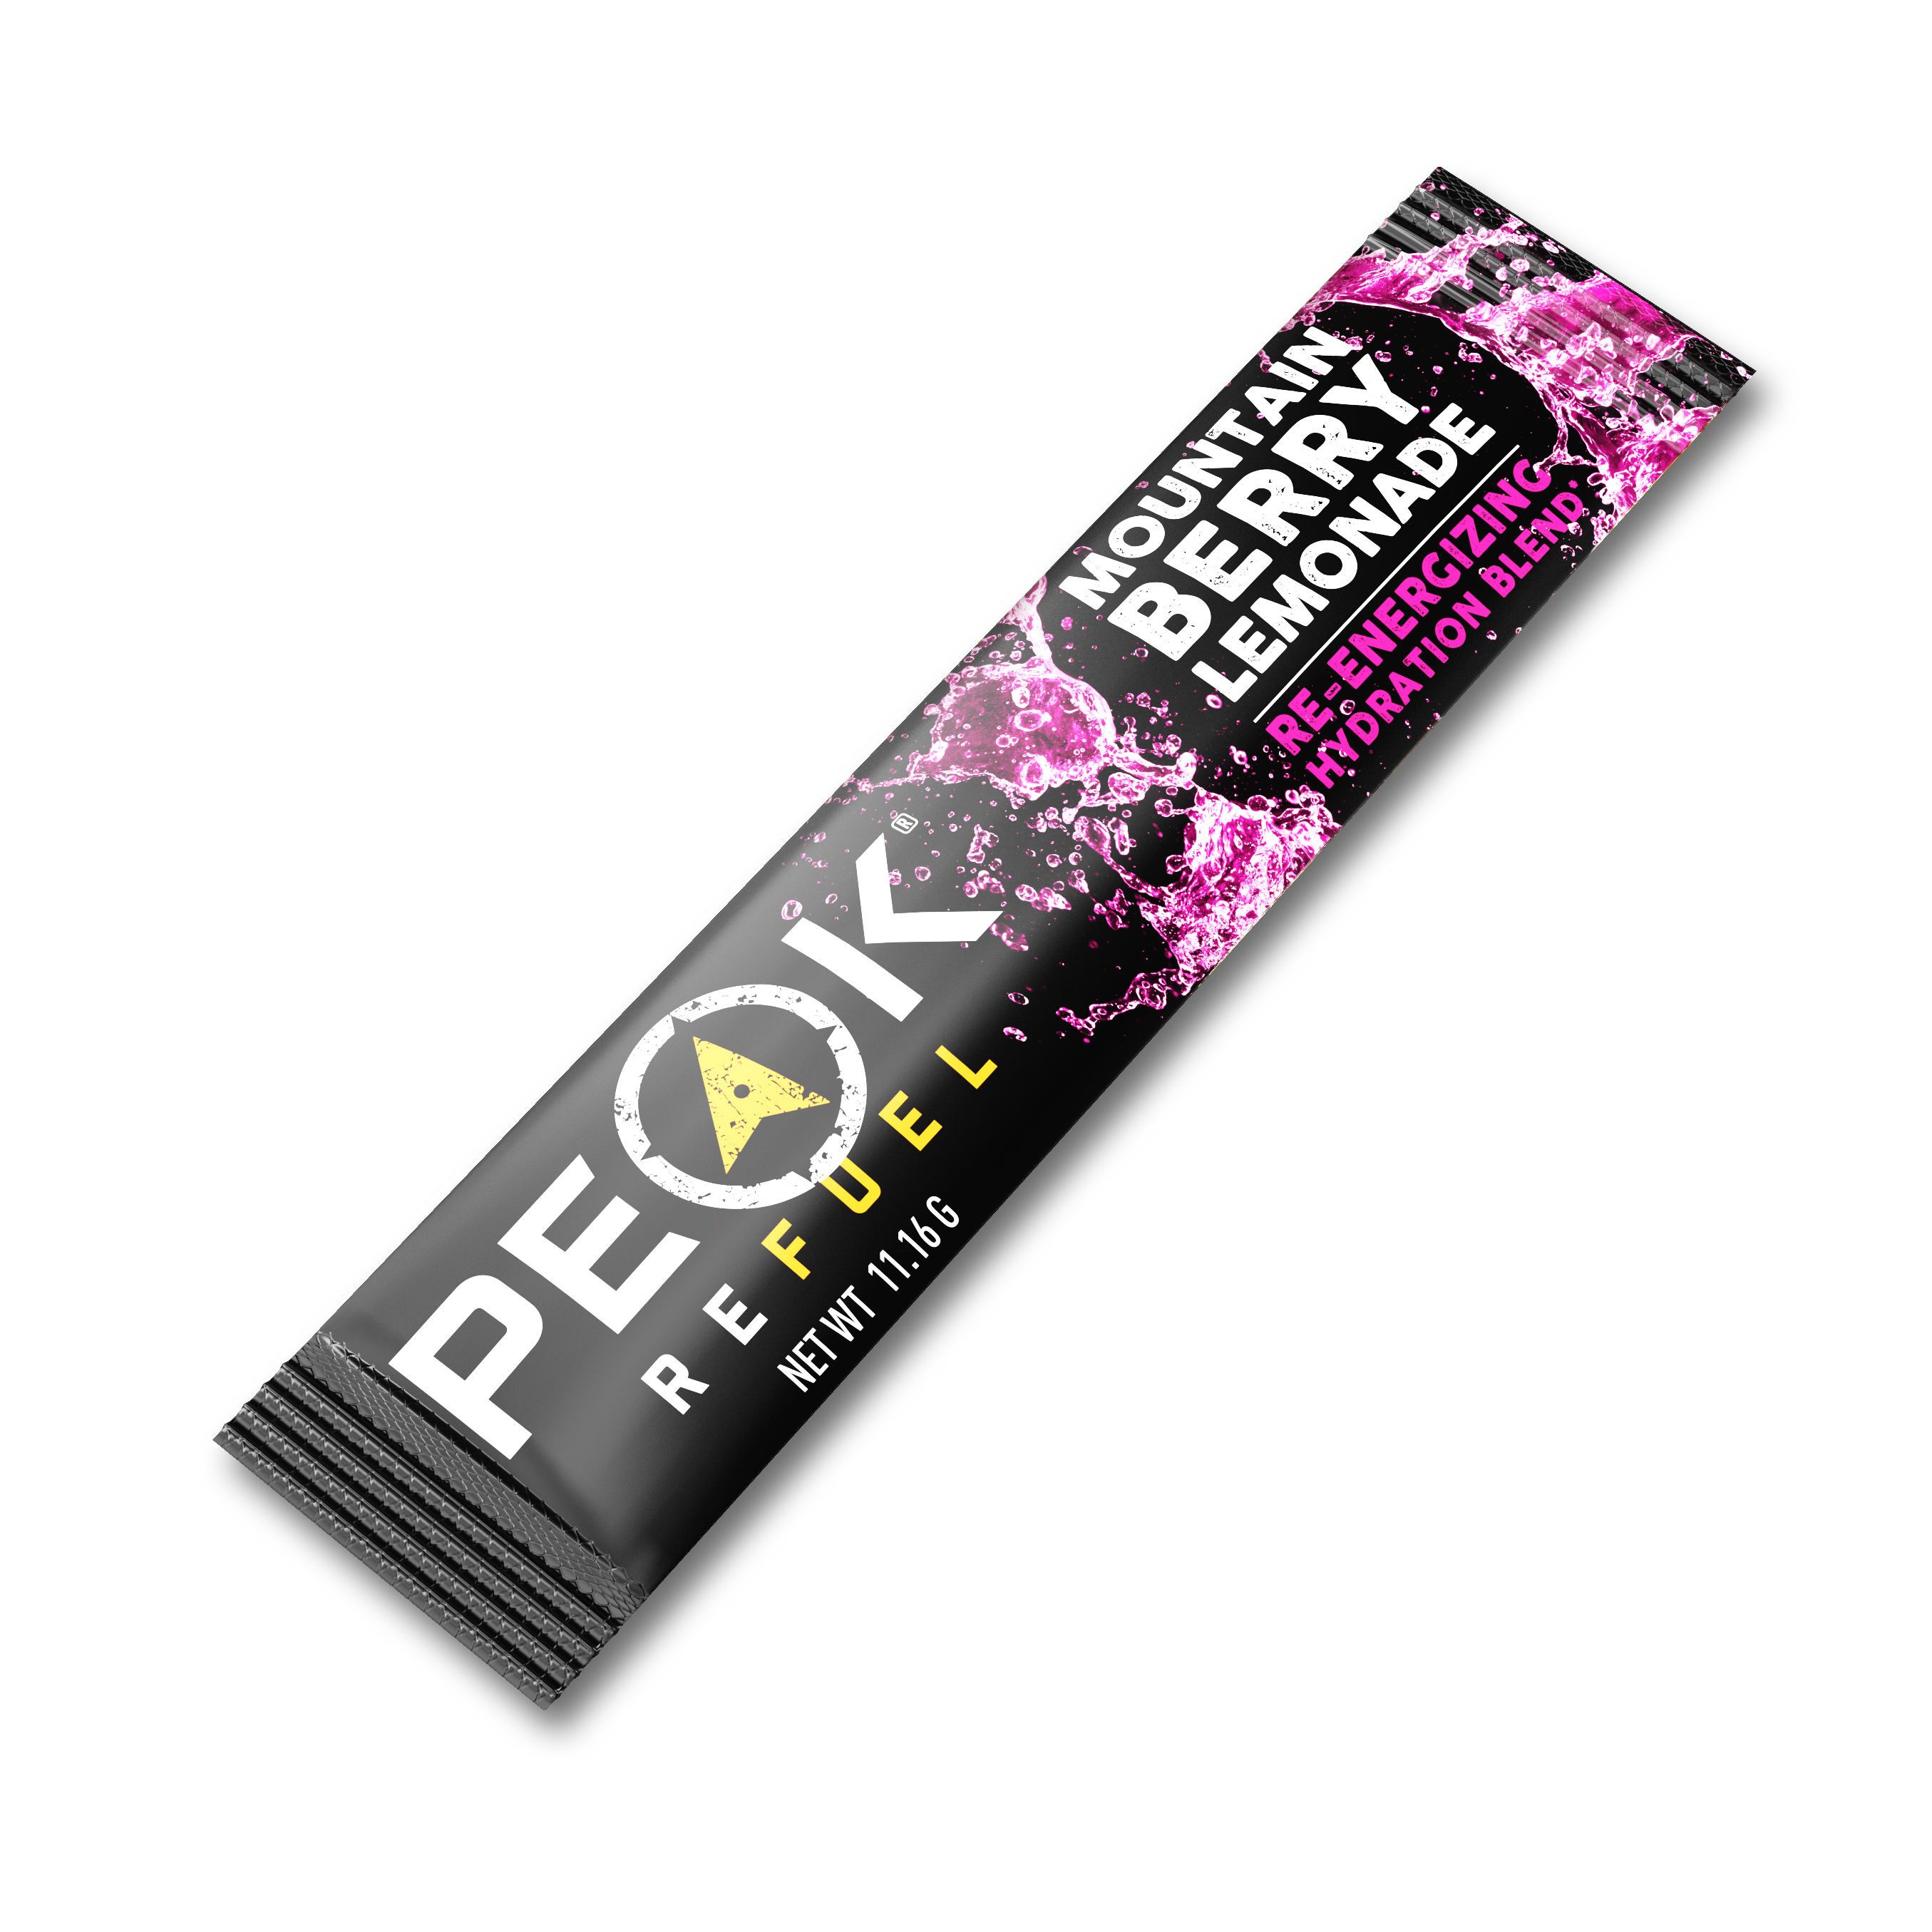 A packet of lemonade with black and pink packaging, featuring white text.